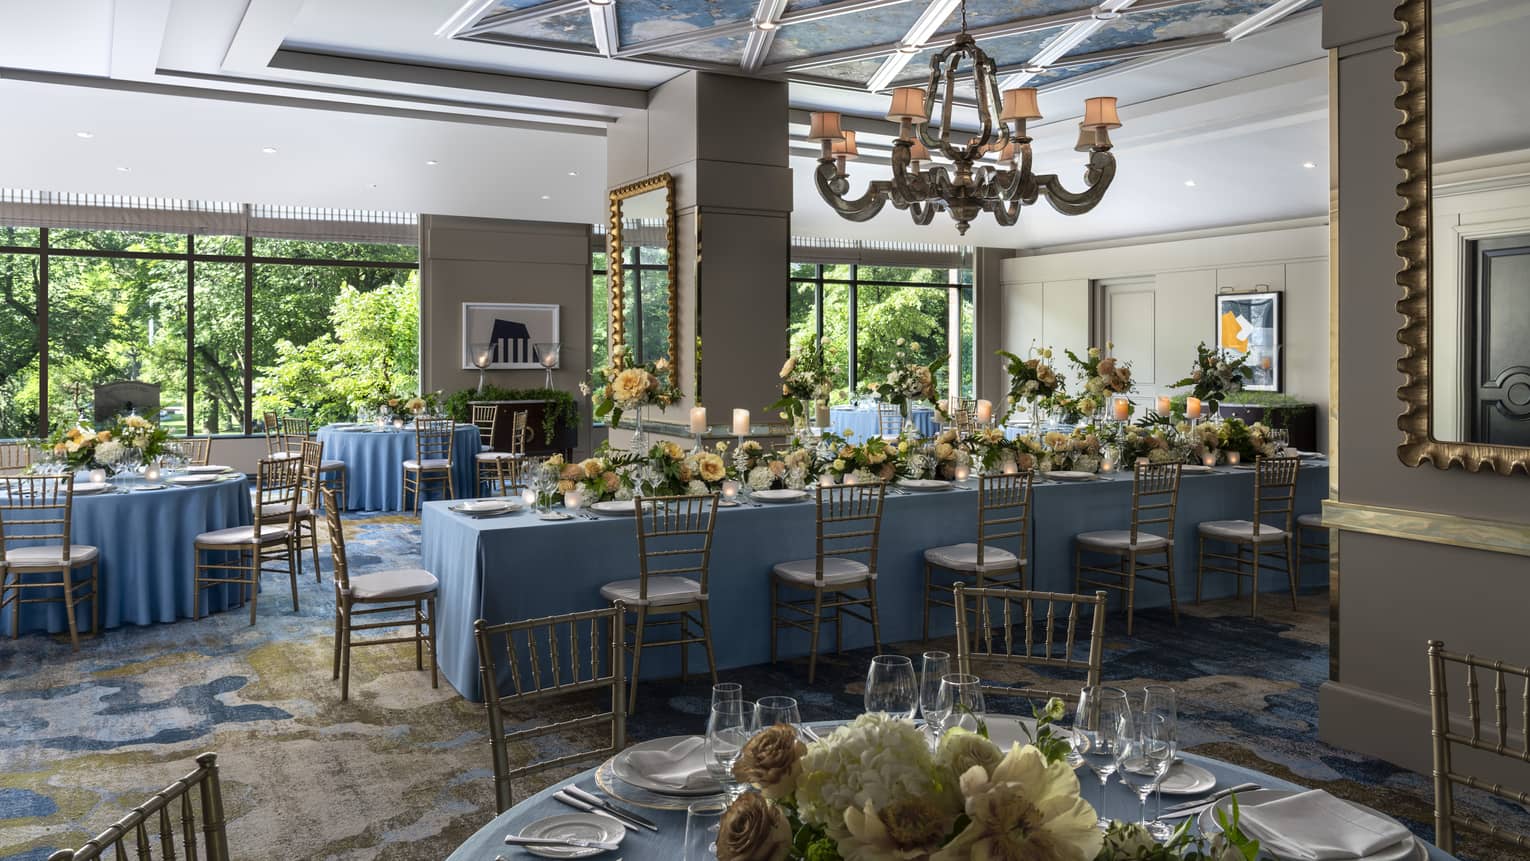 Long and round tables with blue tablecloths with yellow flowers, an old looking chandelier hangs from the ceiling.